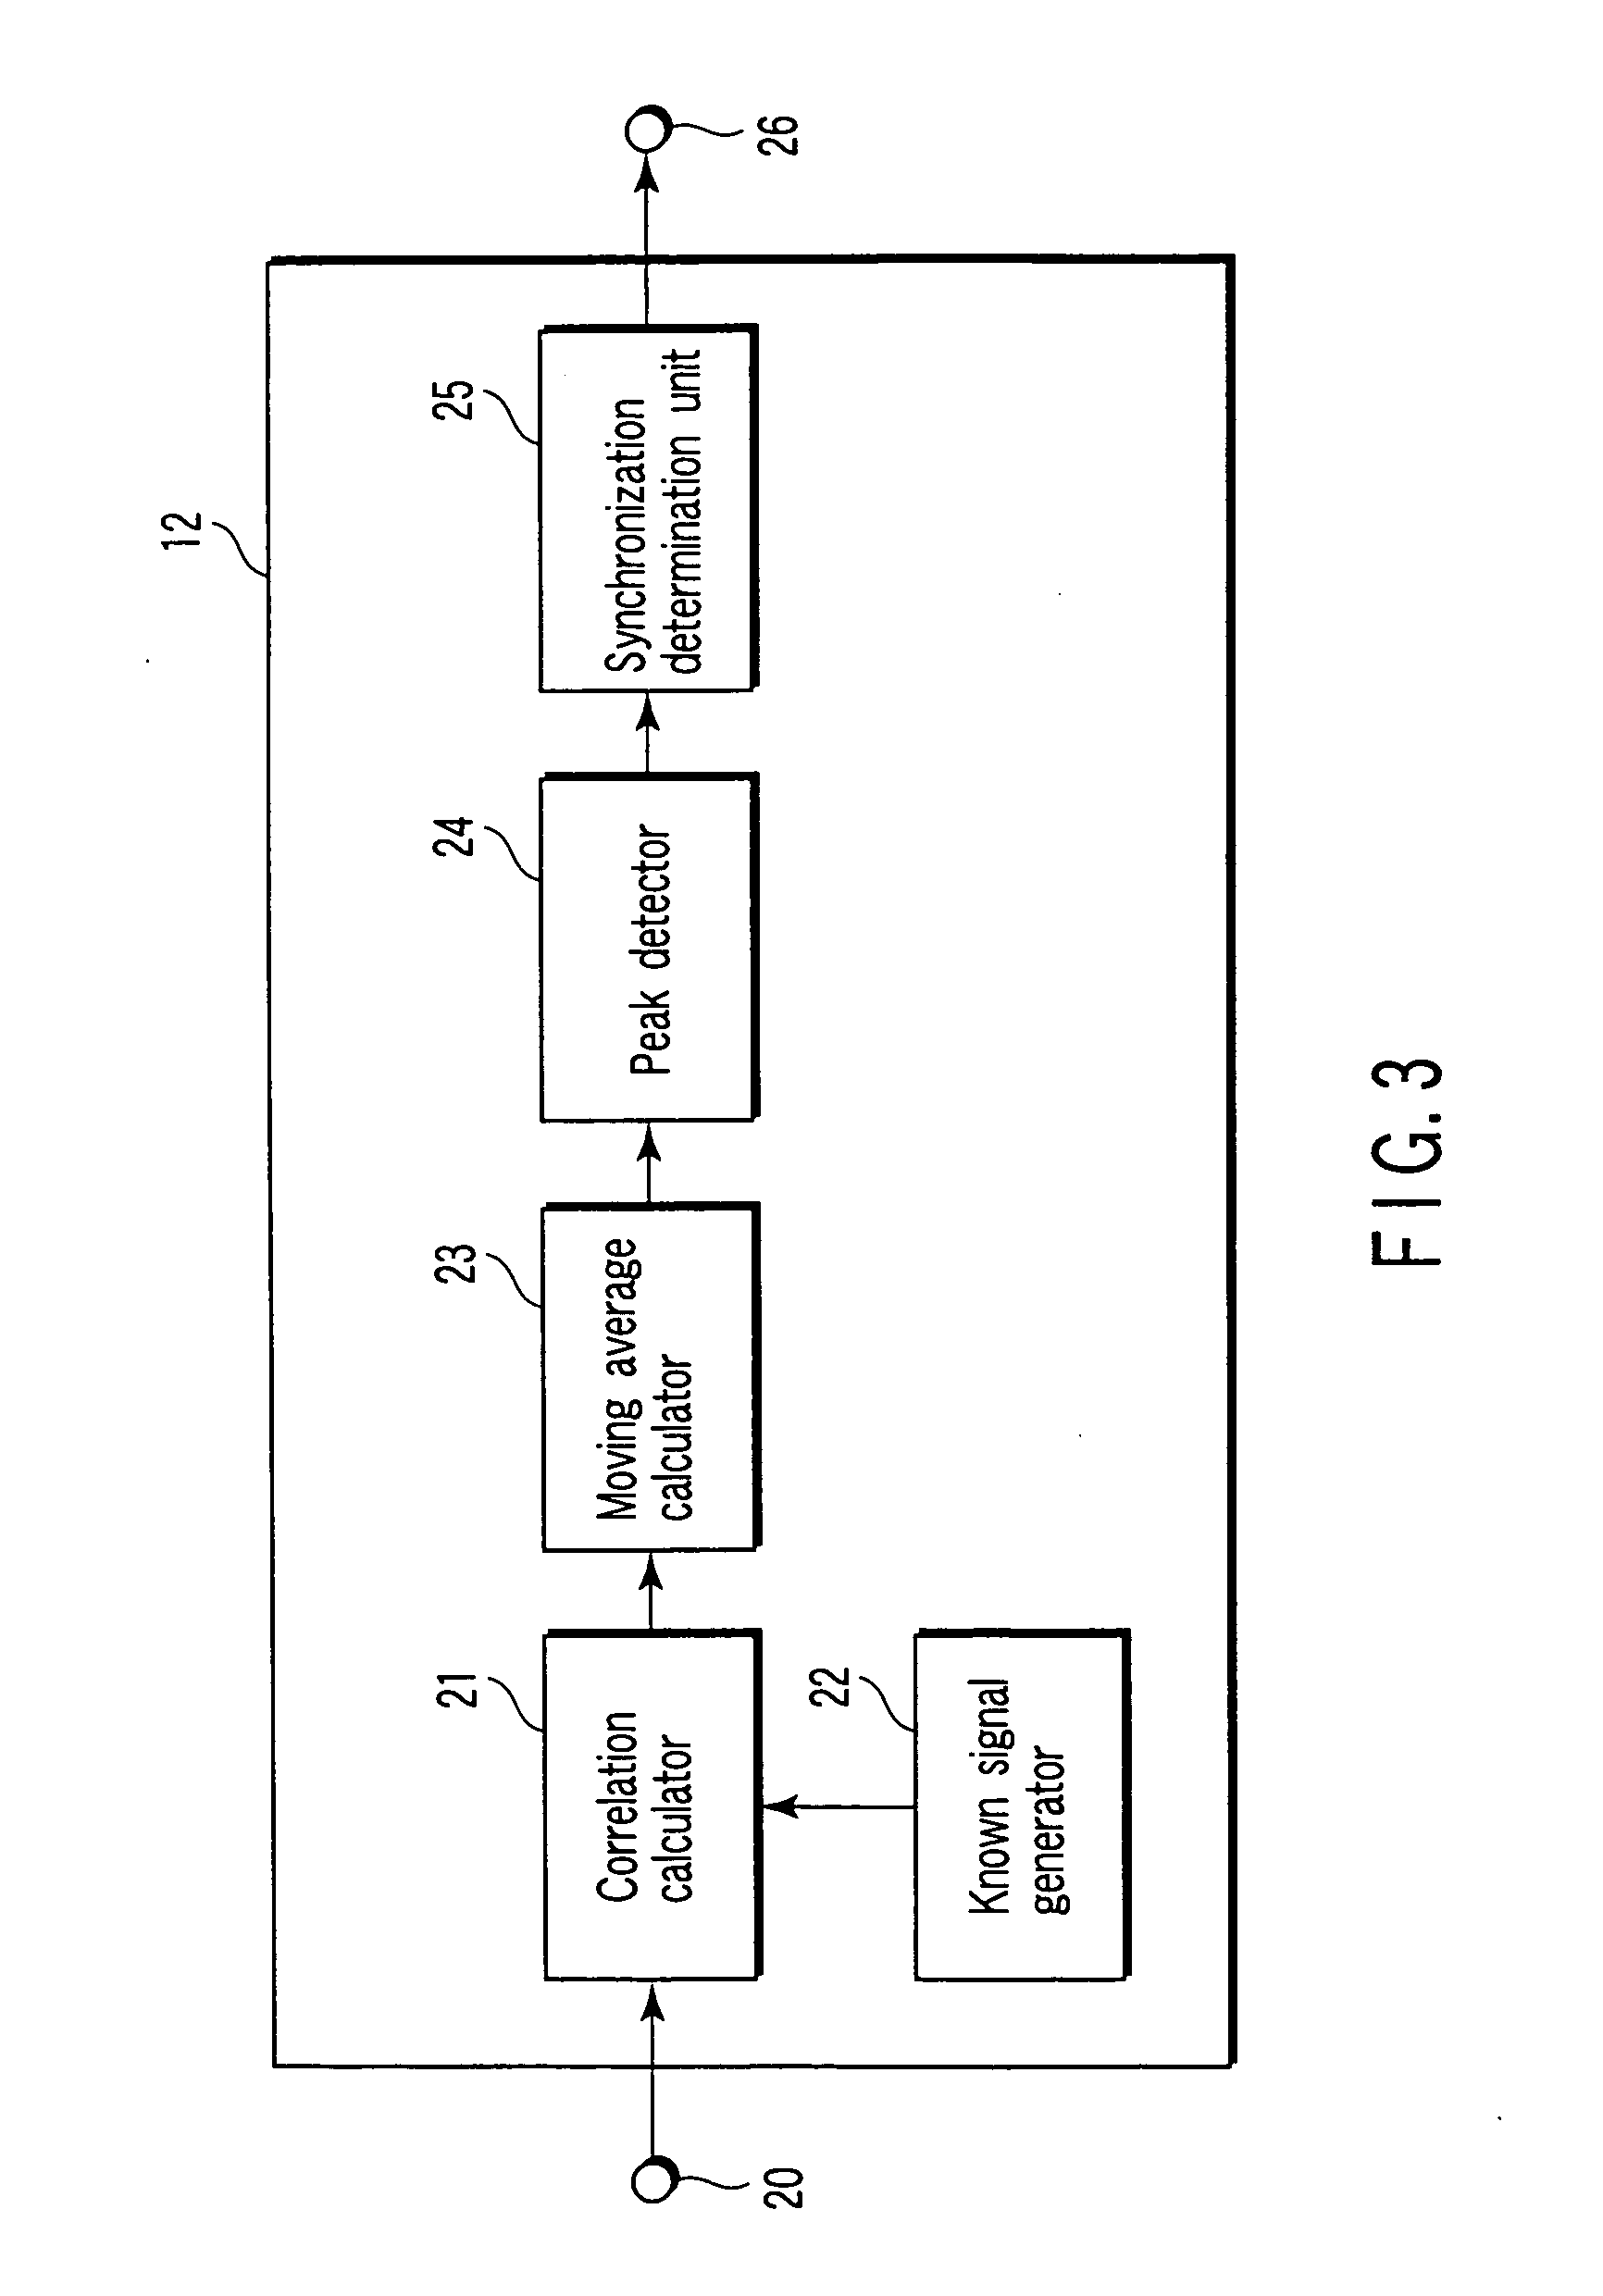 Receiver for burst signal including known signal